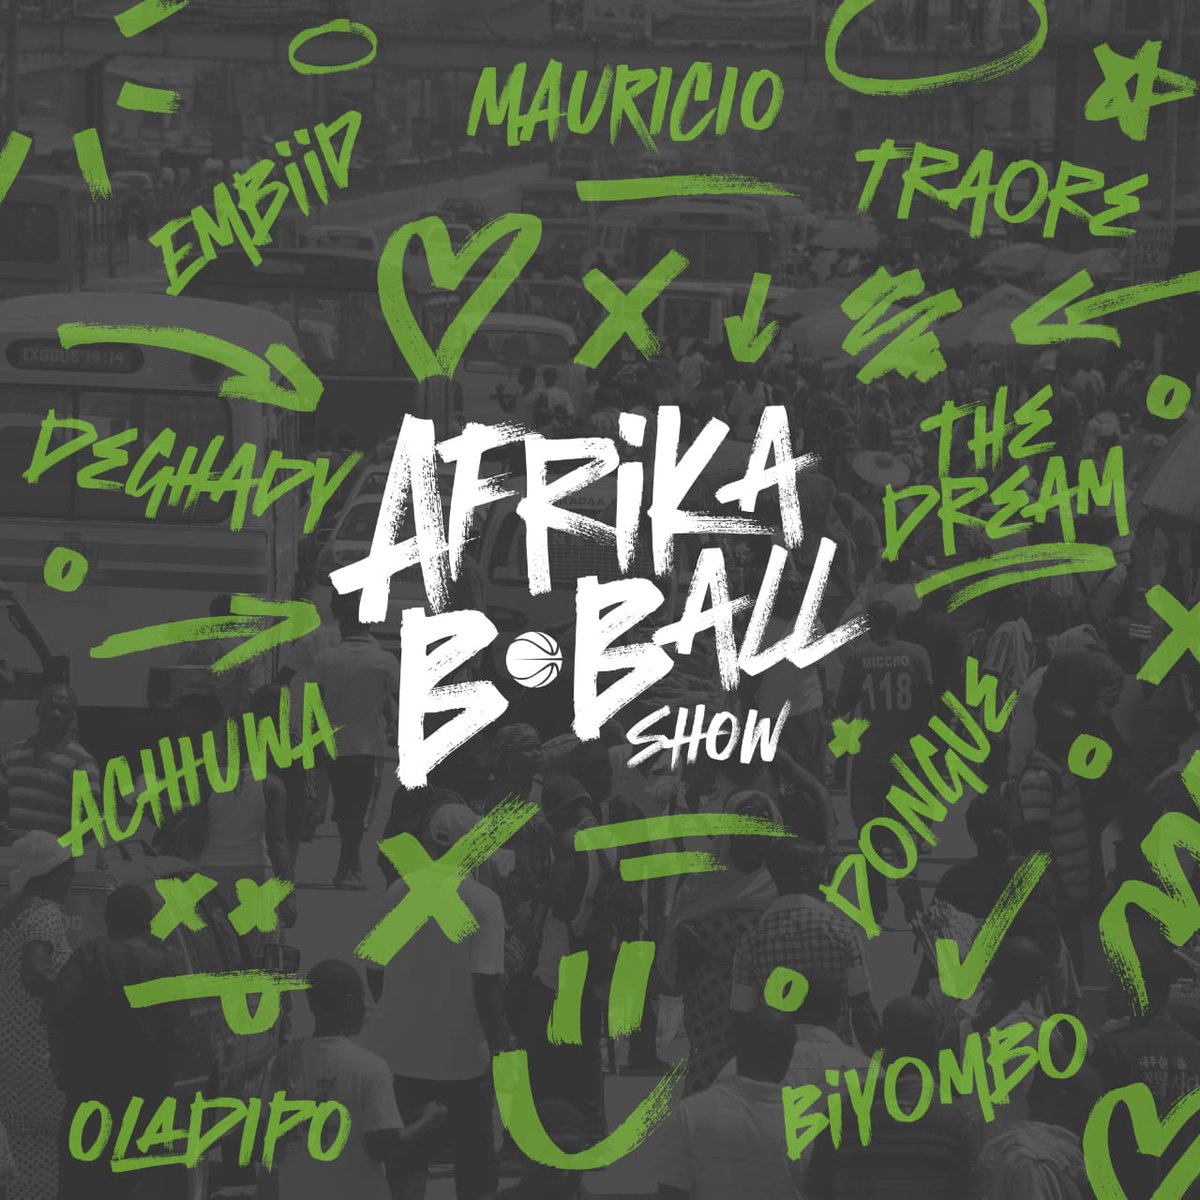 Coming soon... are you ready? Because we are #Afrikabball #NBA #BAL #africanbasketball